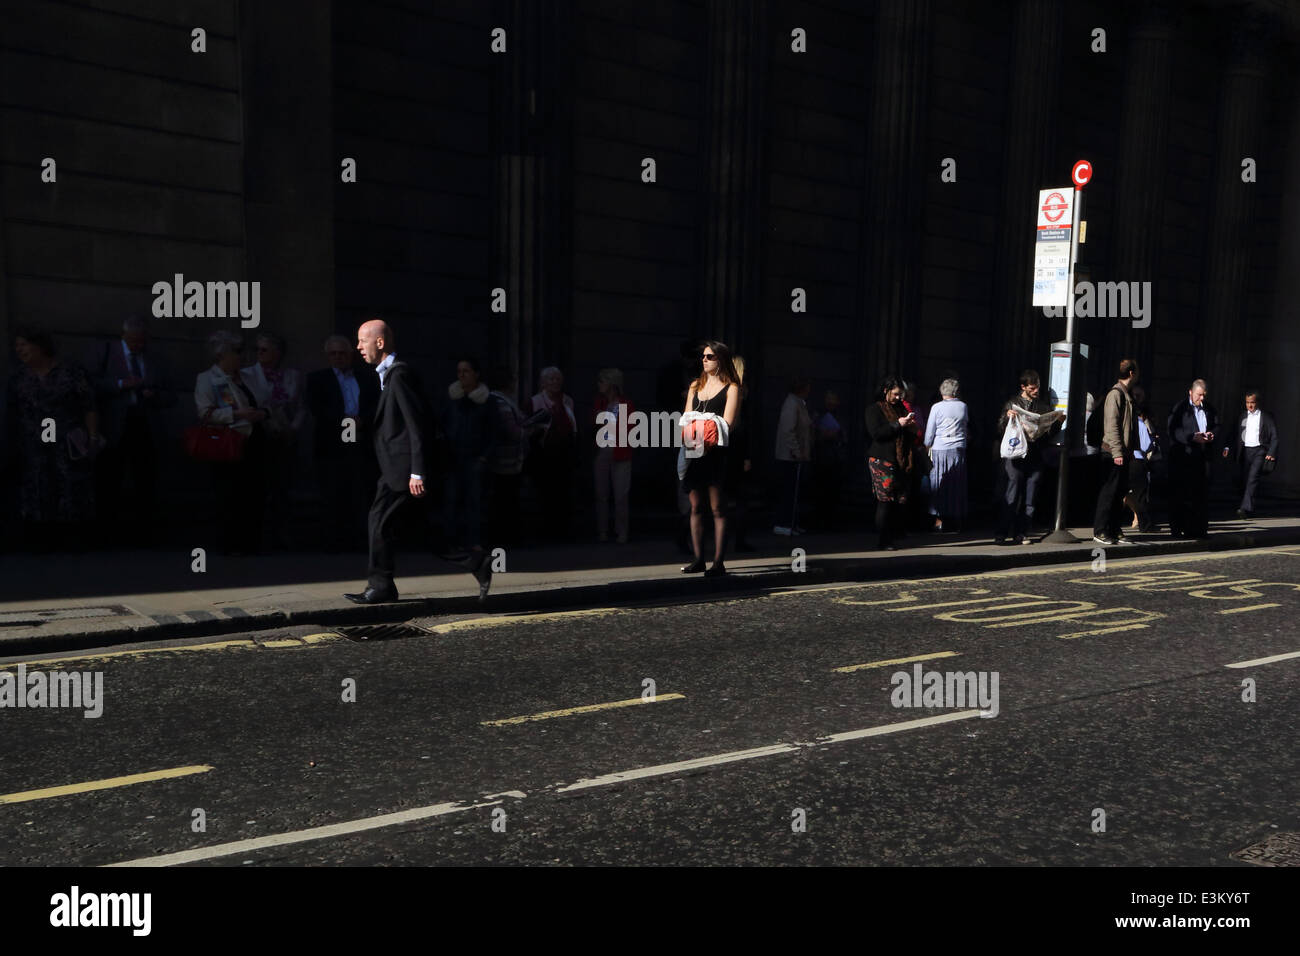 a office workers and bus stop in the city of london, Bank station, UK, London  Photo: Pixstory / alamy Stock Photo